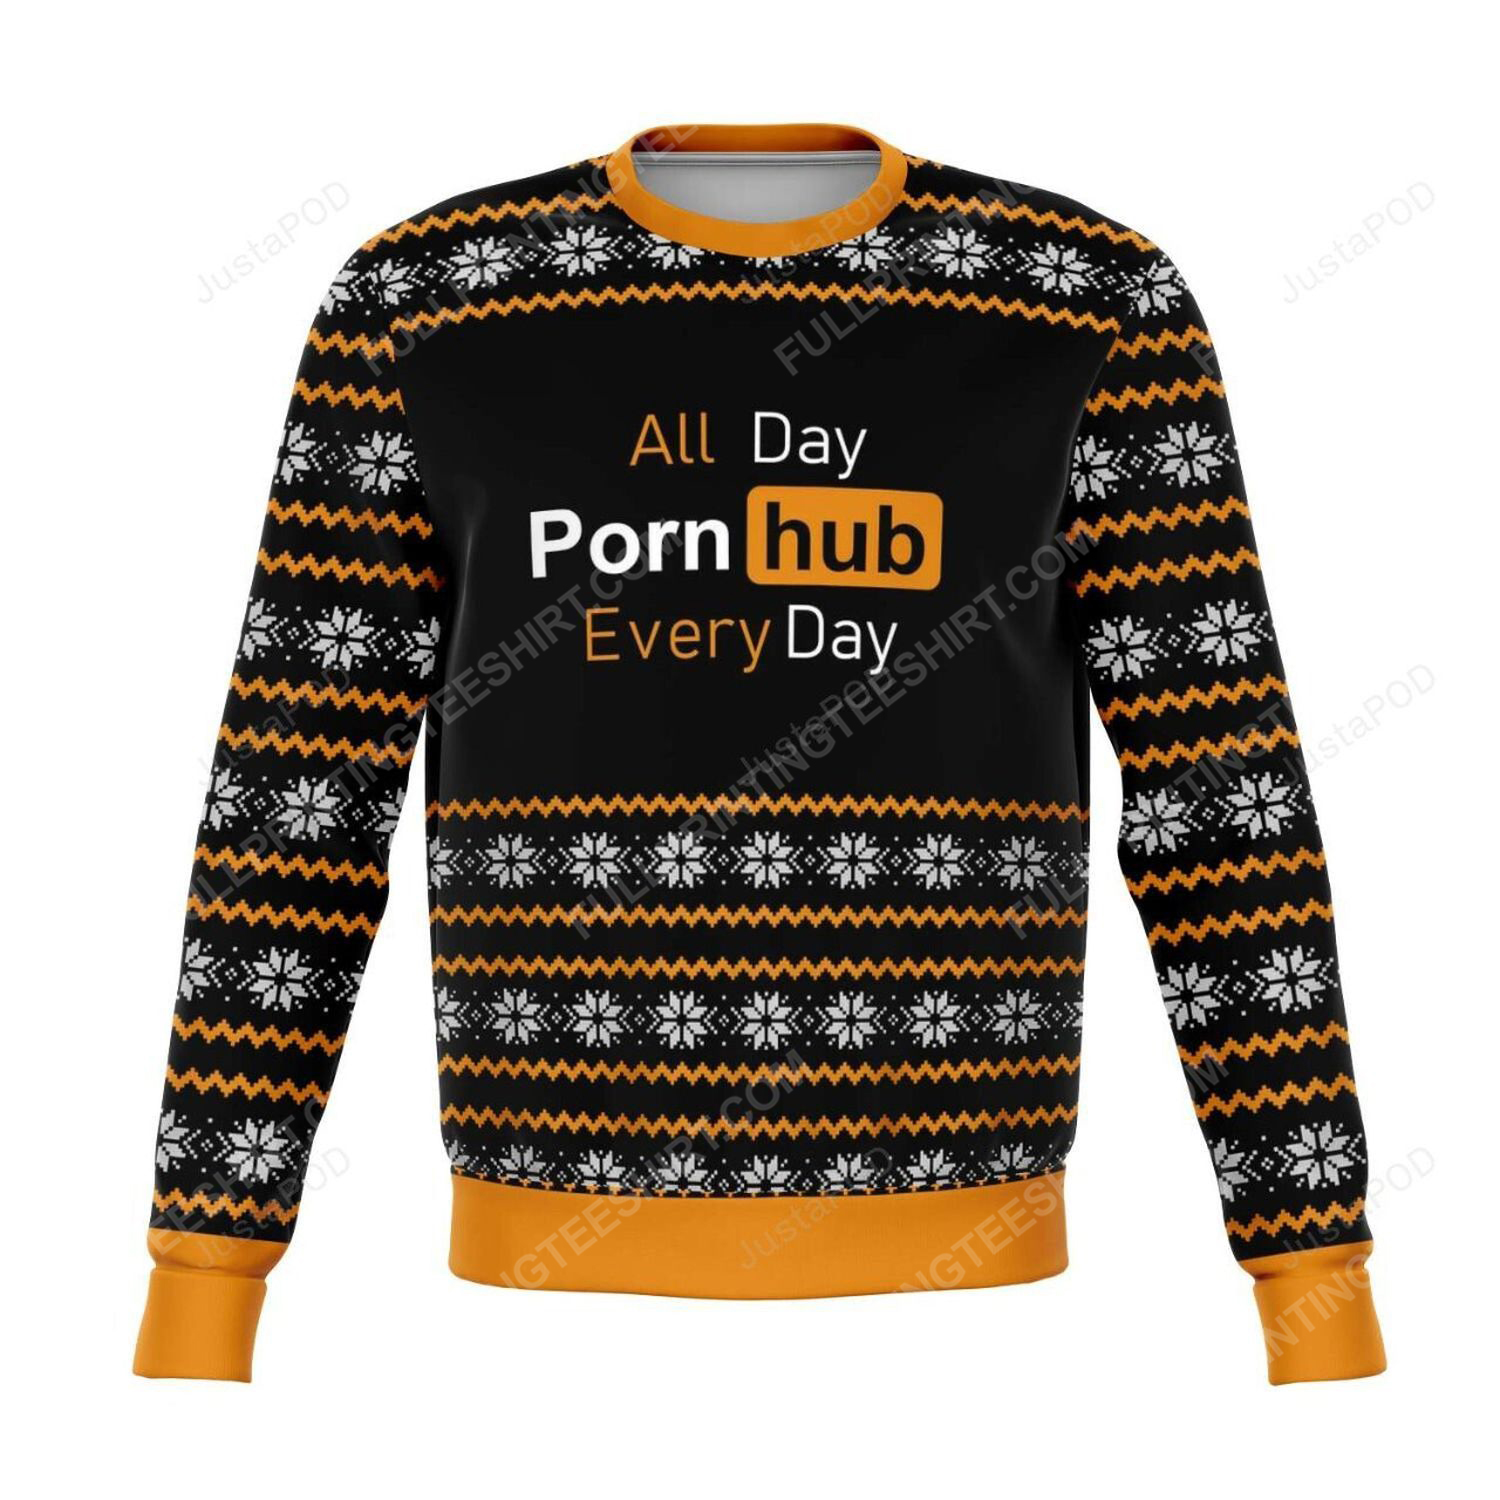 Pornhub every day full print ugly christmas sweater